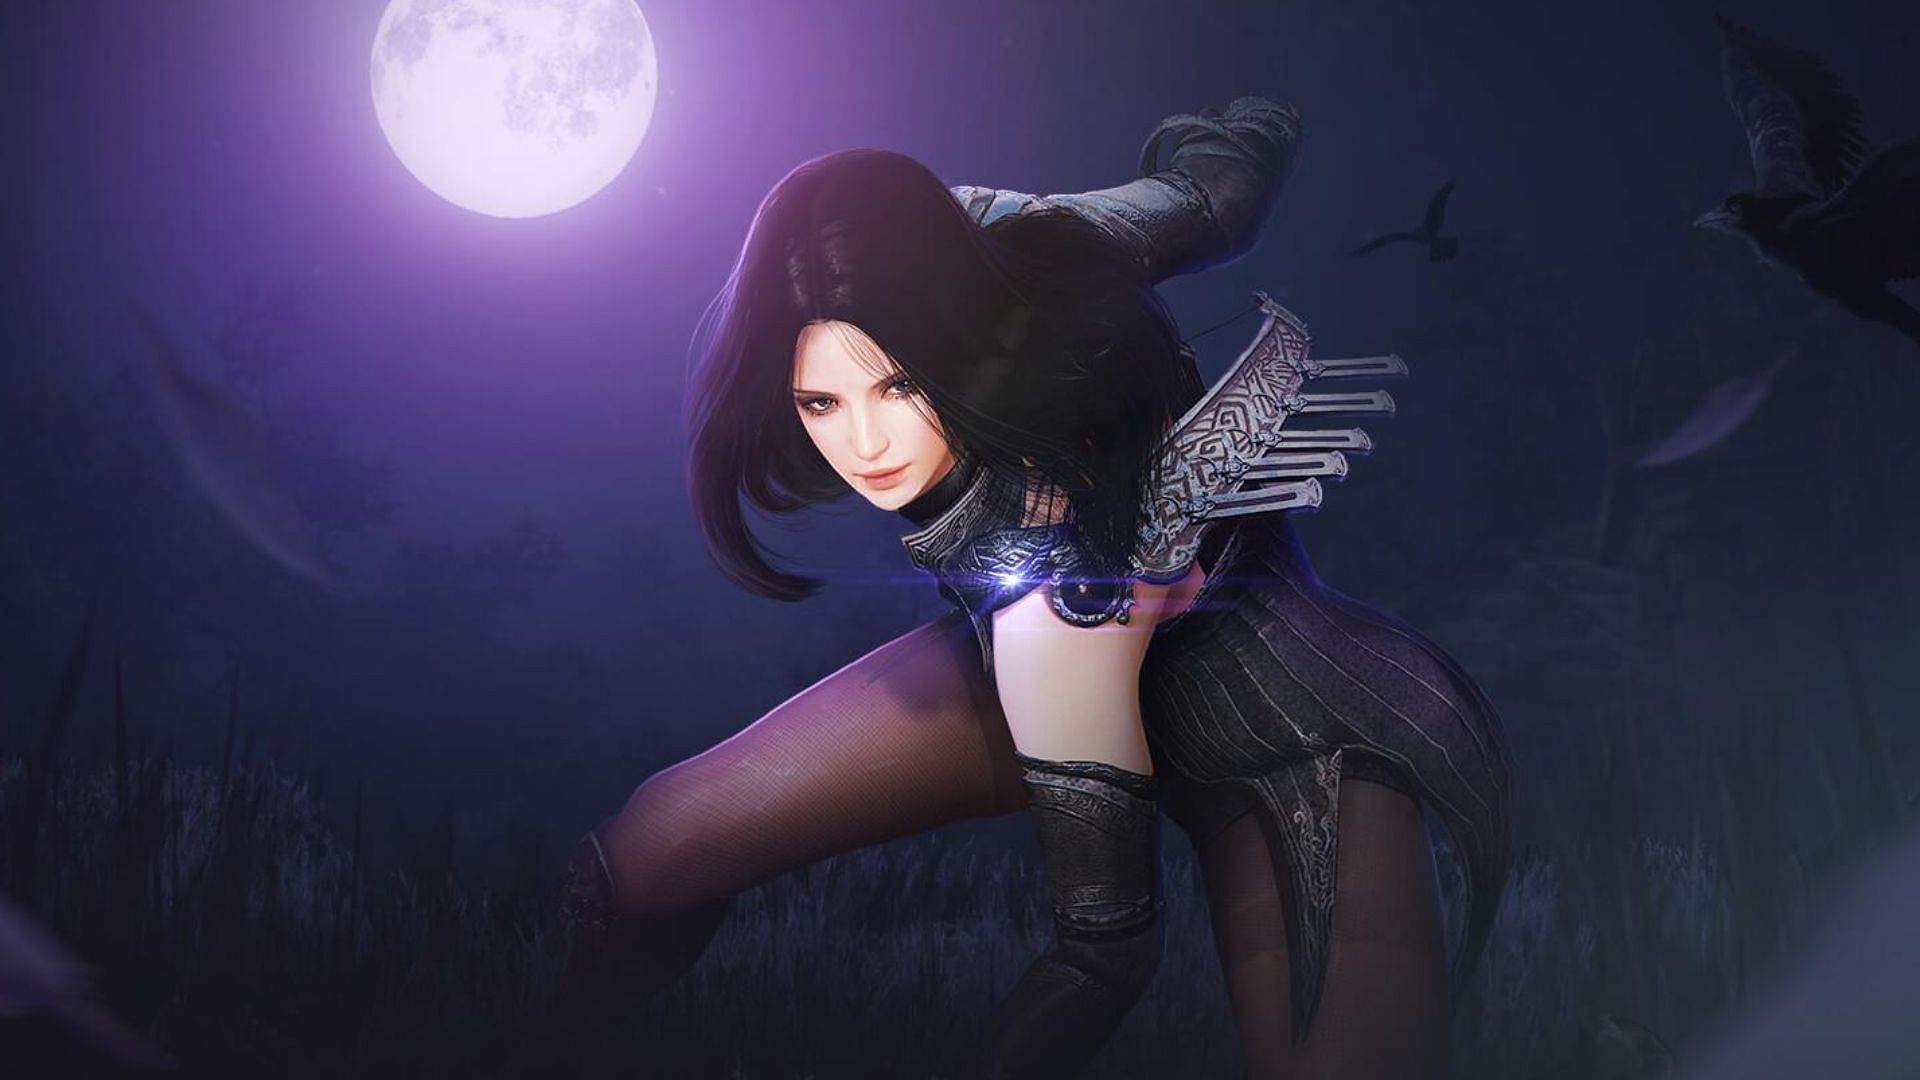 The Sorceress uses her magical powers to defeat most enemies in Black Desert Online (Image via Pearl Abyss)